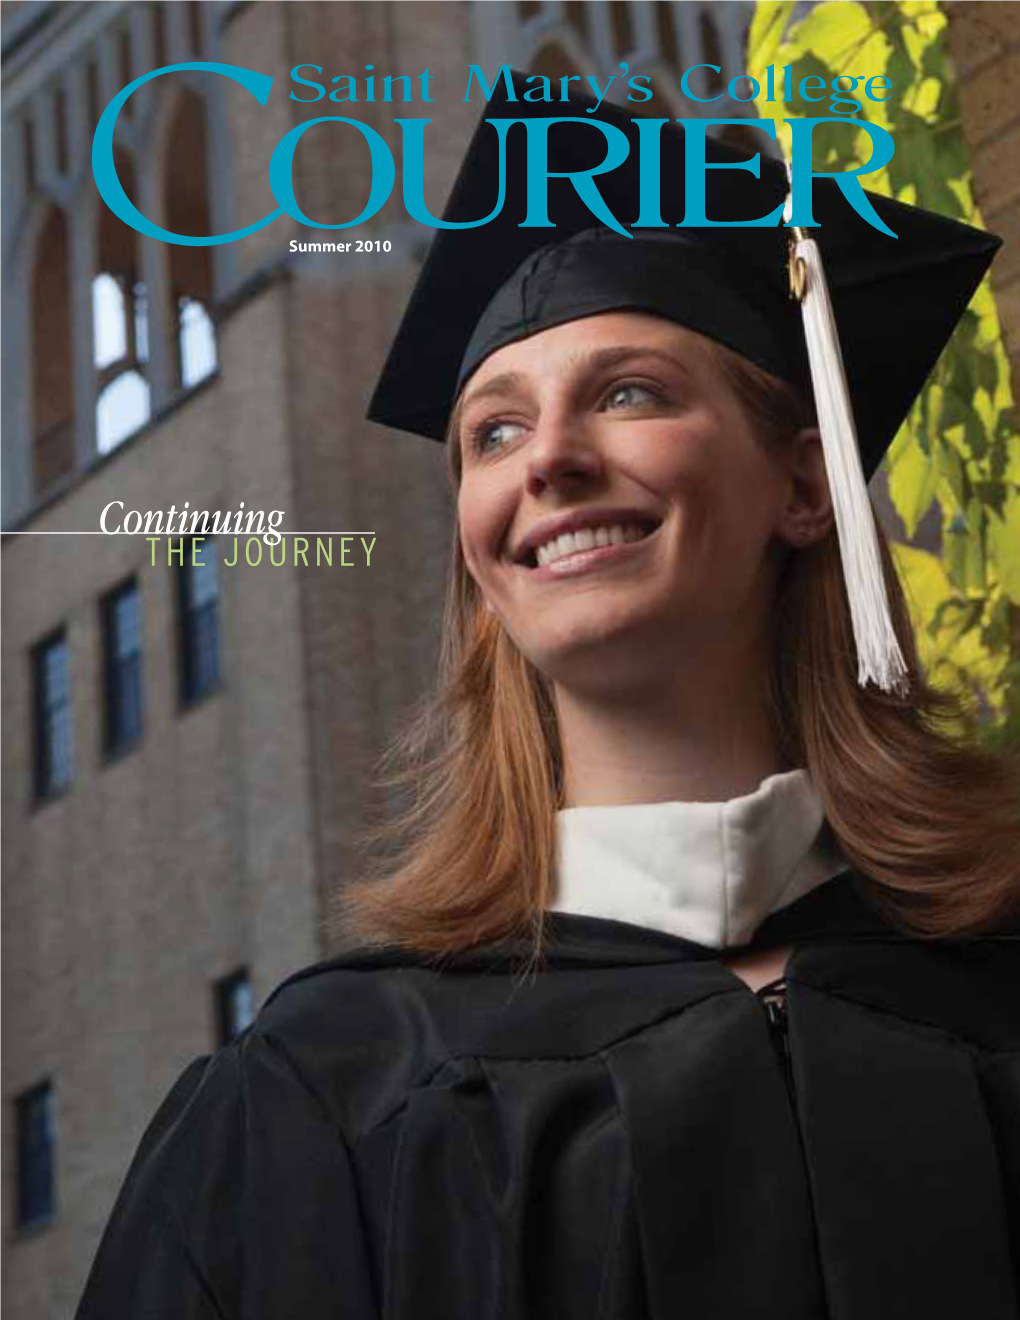 Download the Courier Summer 2010